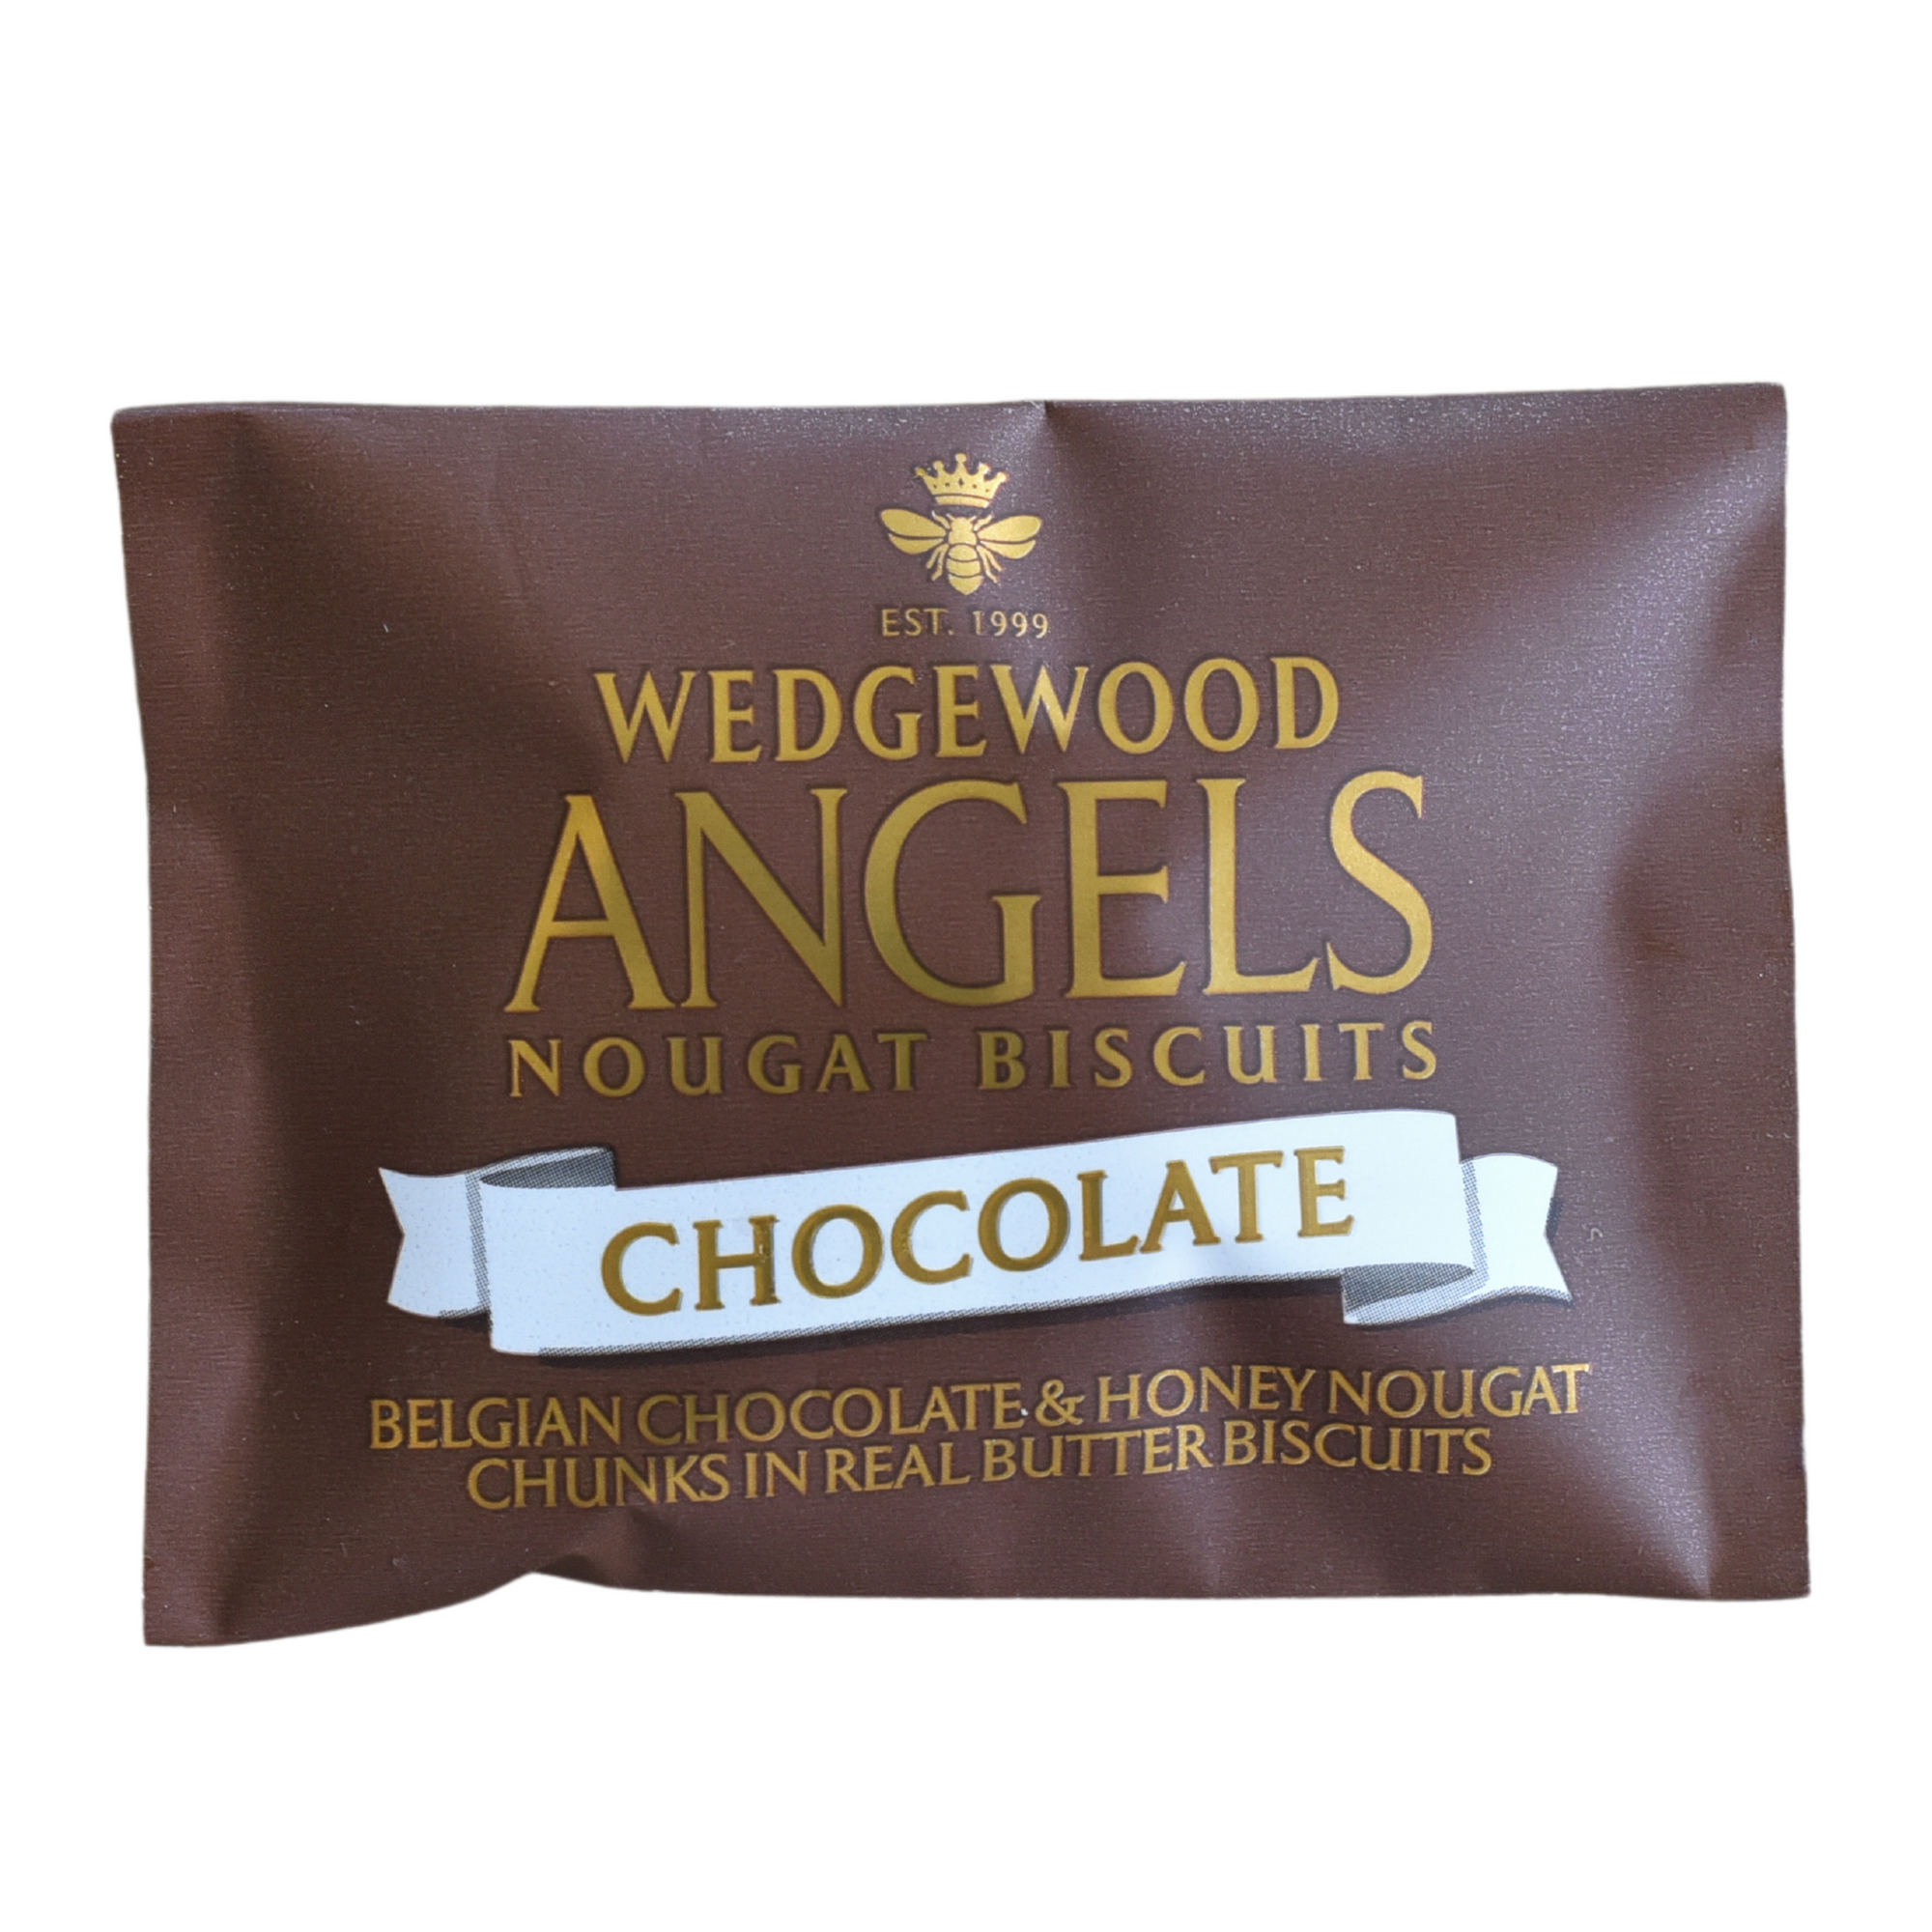 Angels Honey Nougat Biscuits - Belgian Chocolate Single Serving 10g (Box of 60)